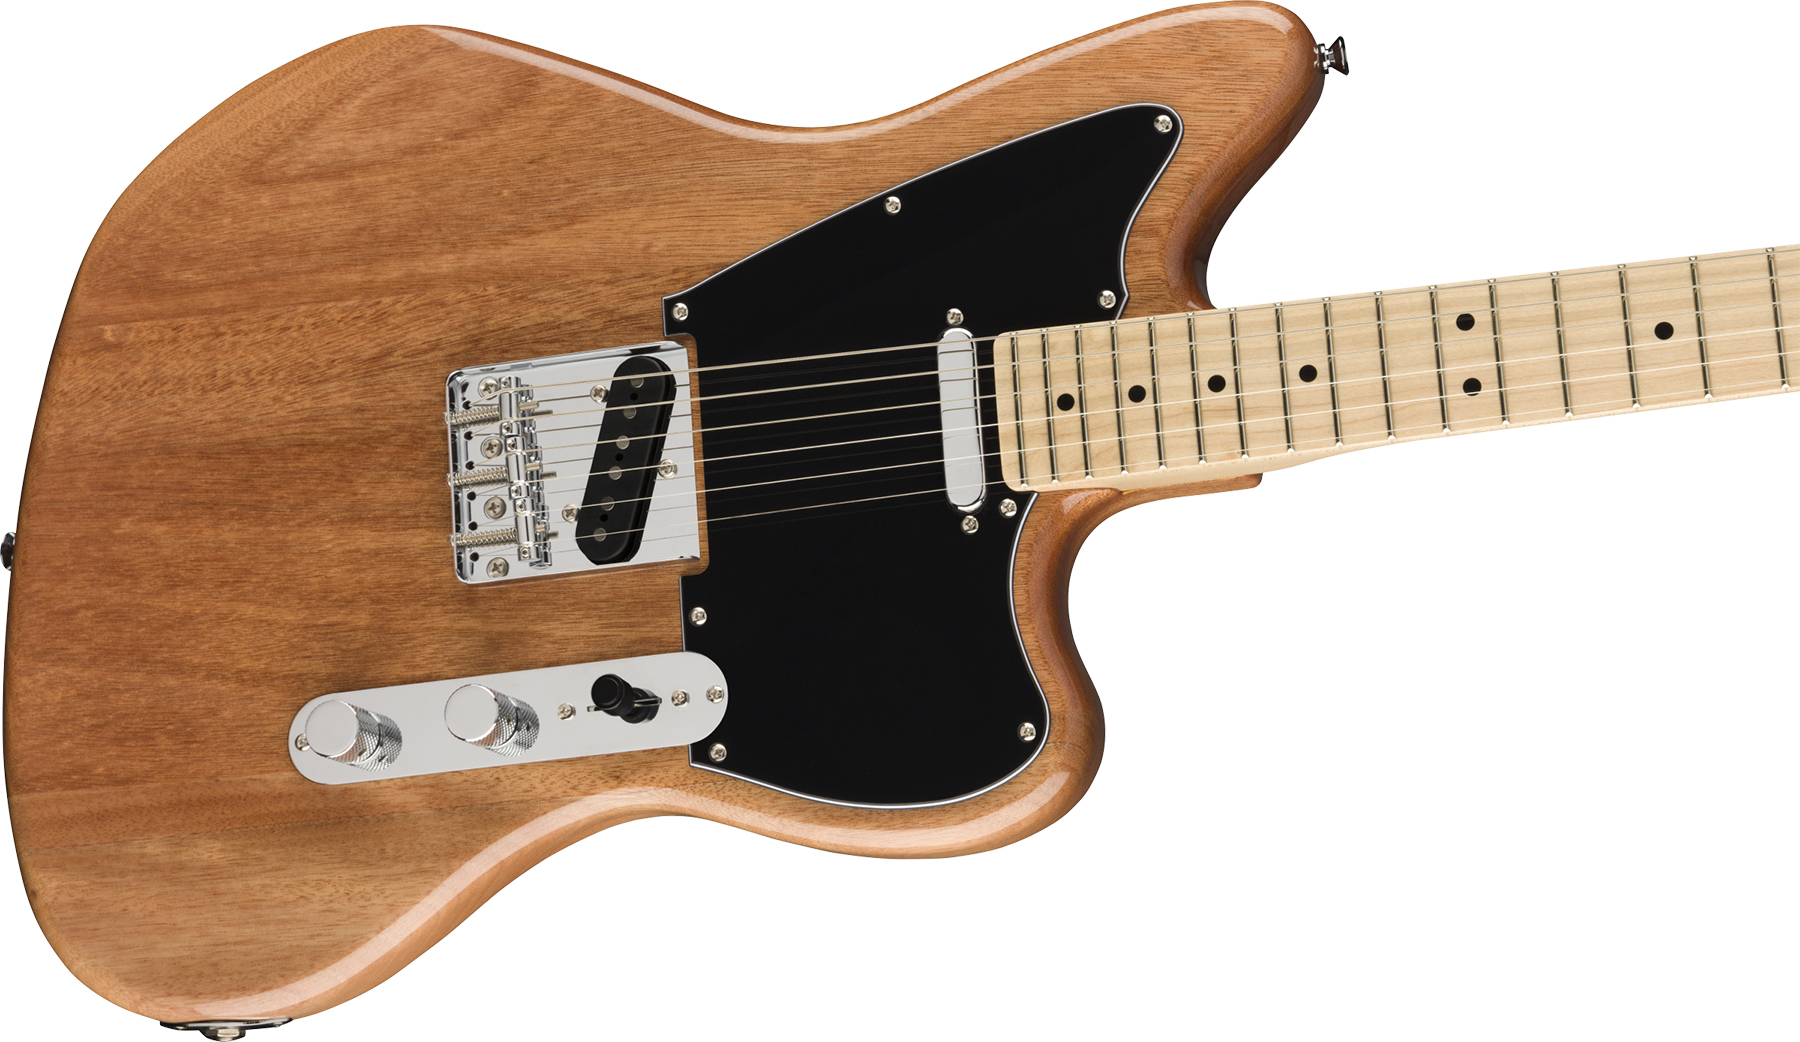 Squier Tele Offset Paranormal Ss Ht Mn - Natural - Guitarra electrica retro rock - Variation 2